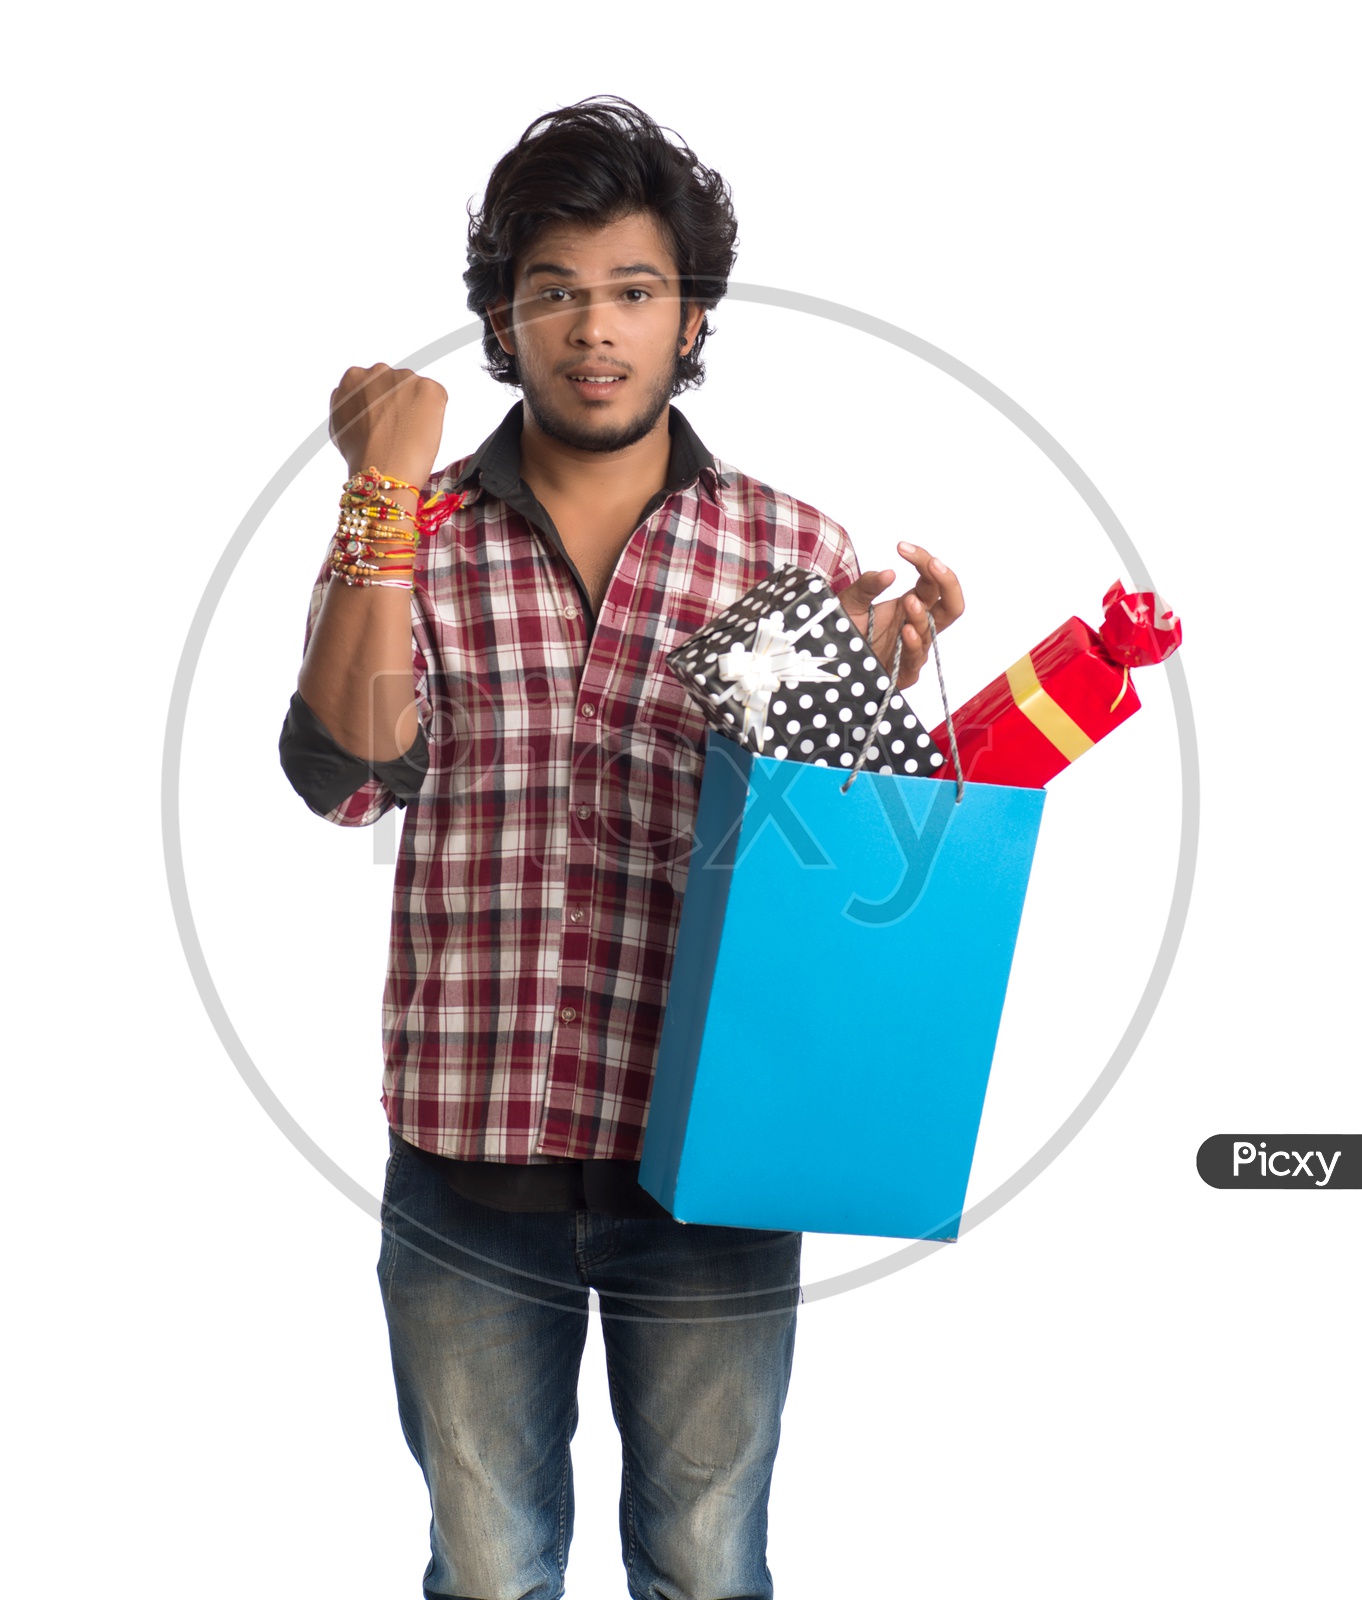 Indian Young Man Showing Rakhi Tied Hand And  with  a Gift Box For his Sister  On an  Isolated White Background